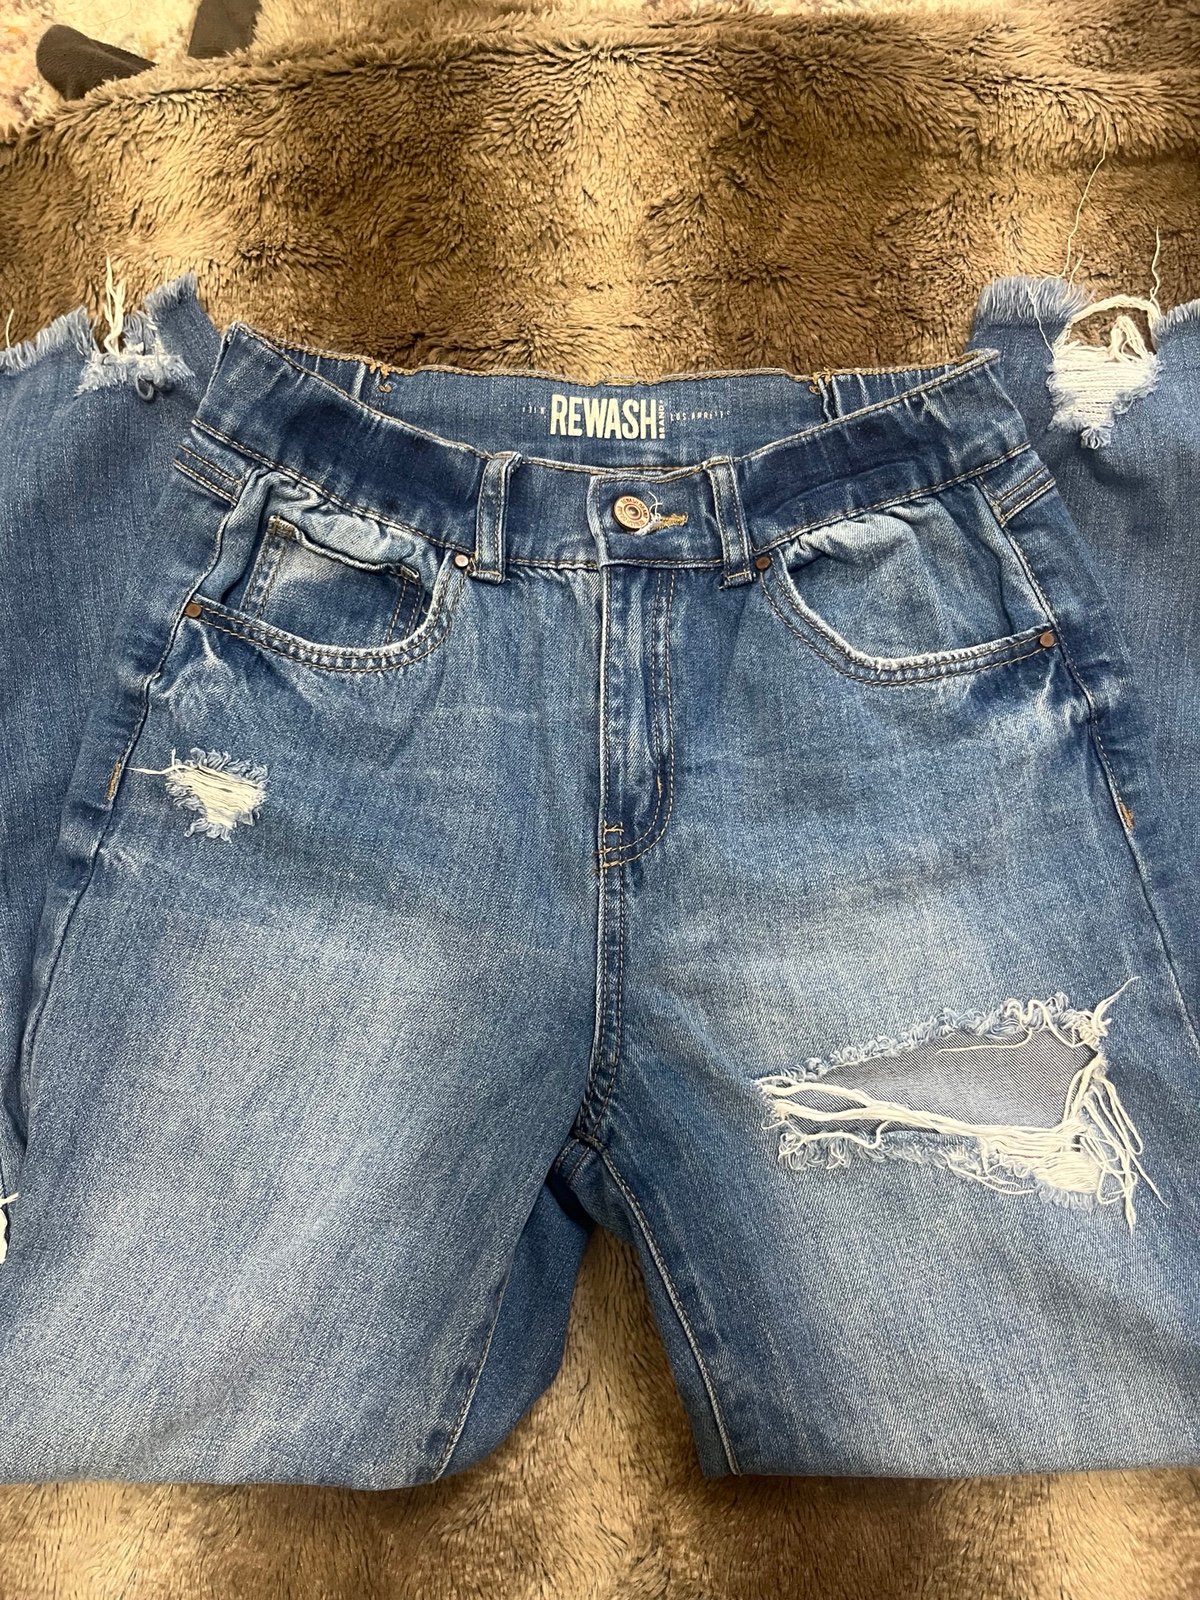 Wholesale price Distressed High Waist Mom Jeans Size 5(